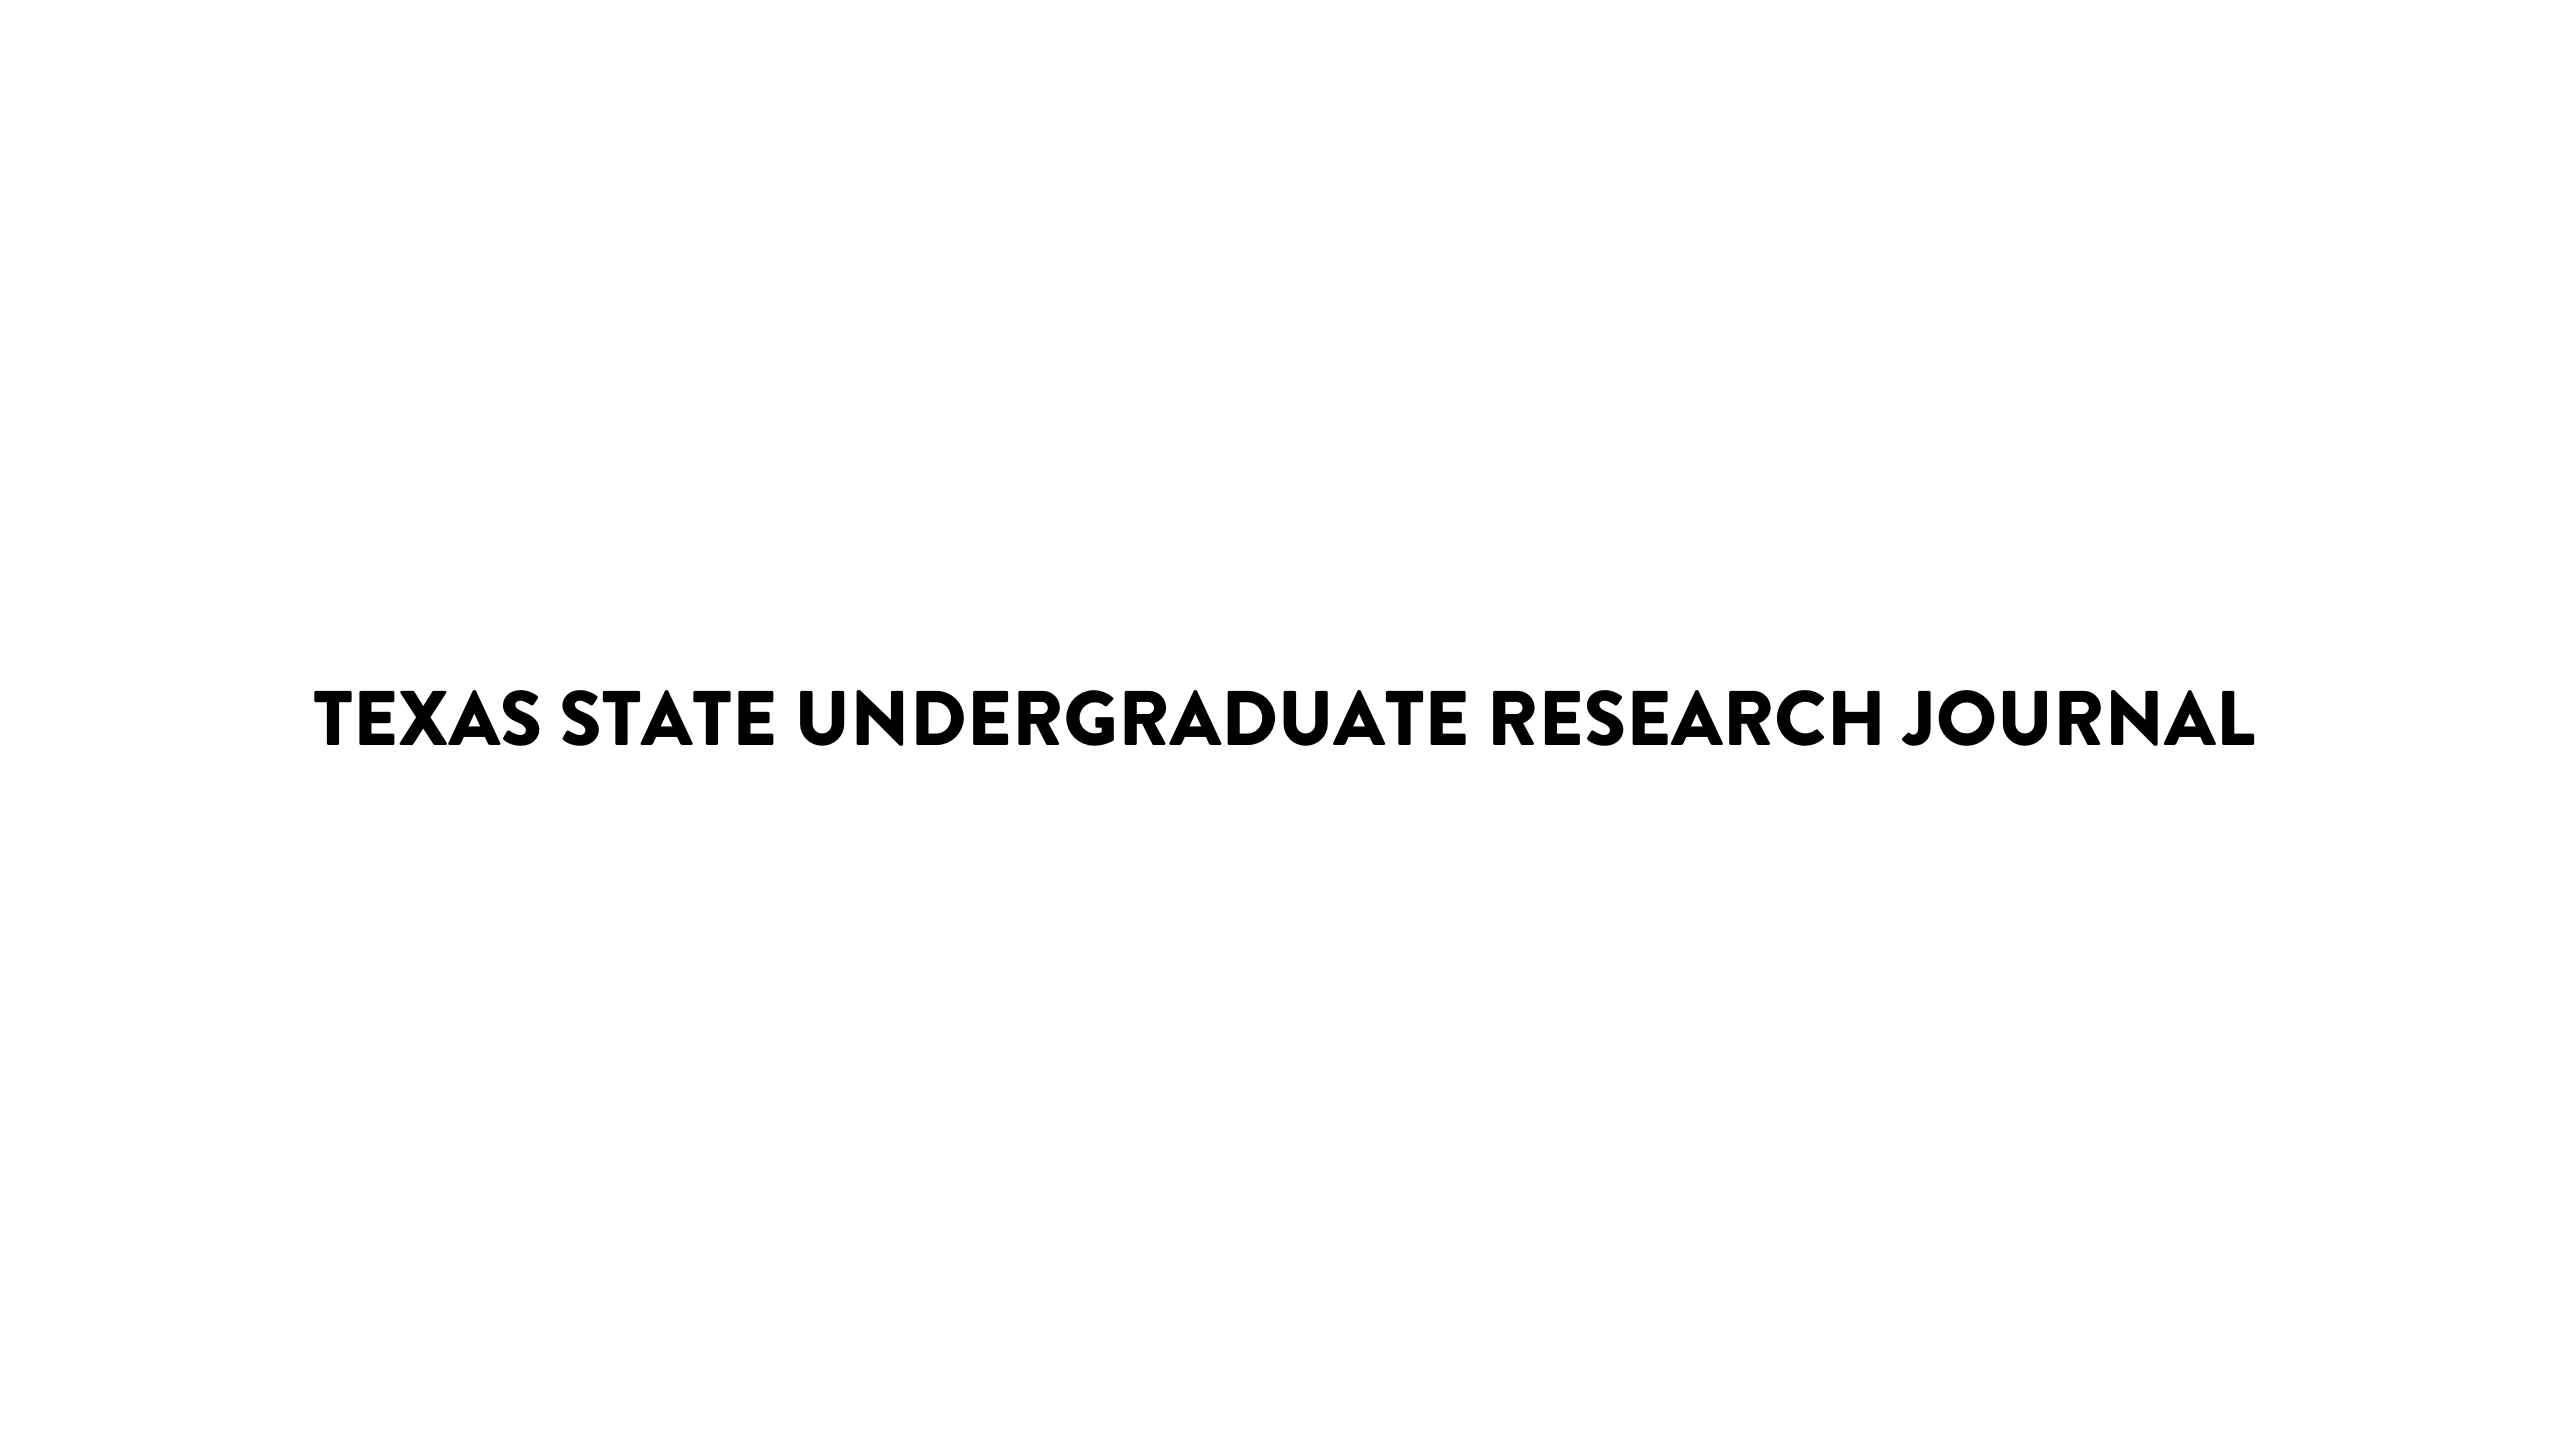 Texas State Undergraduate Research Journal